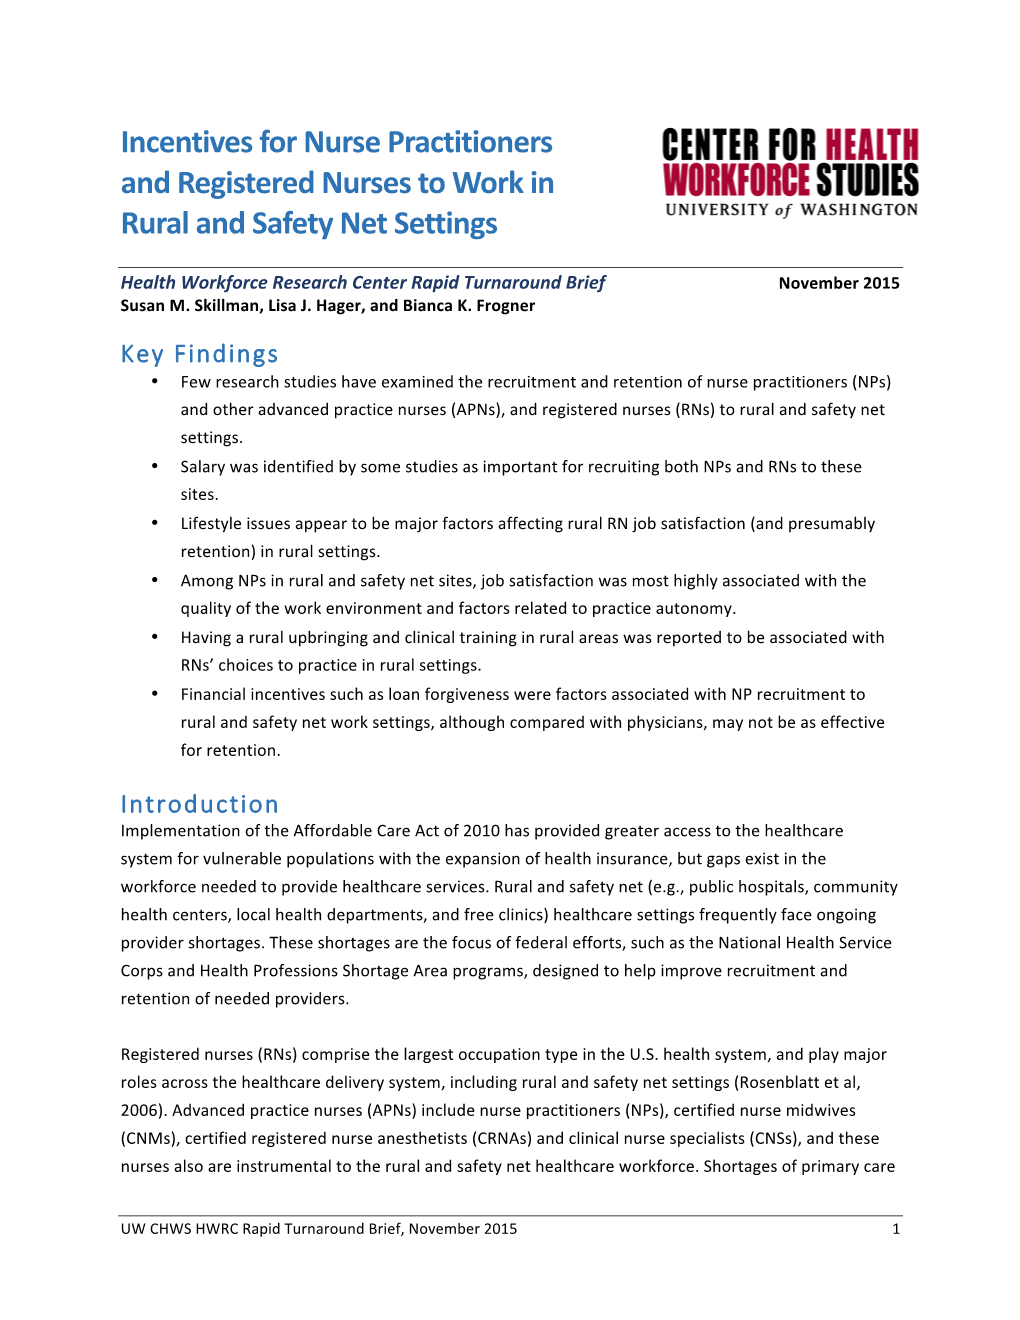 Incentives for Nurse Practitioners and Registered Nurses to Work in Rural and Safety Net Settings